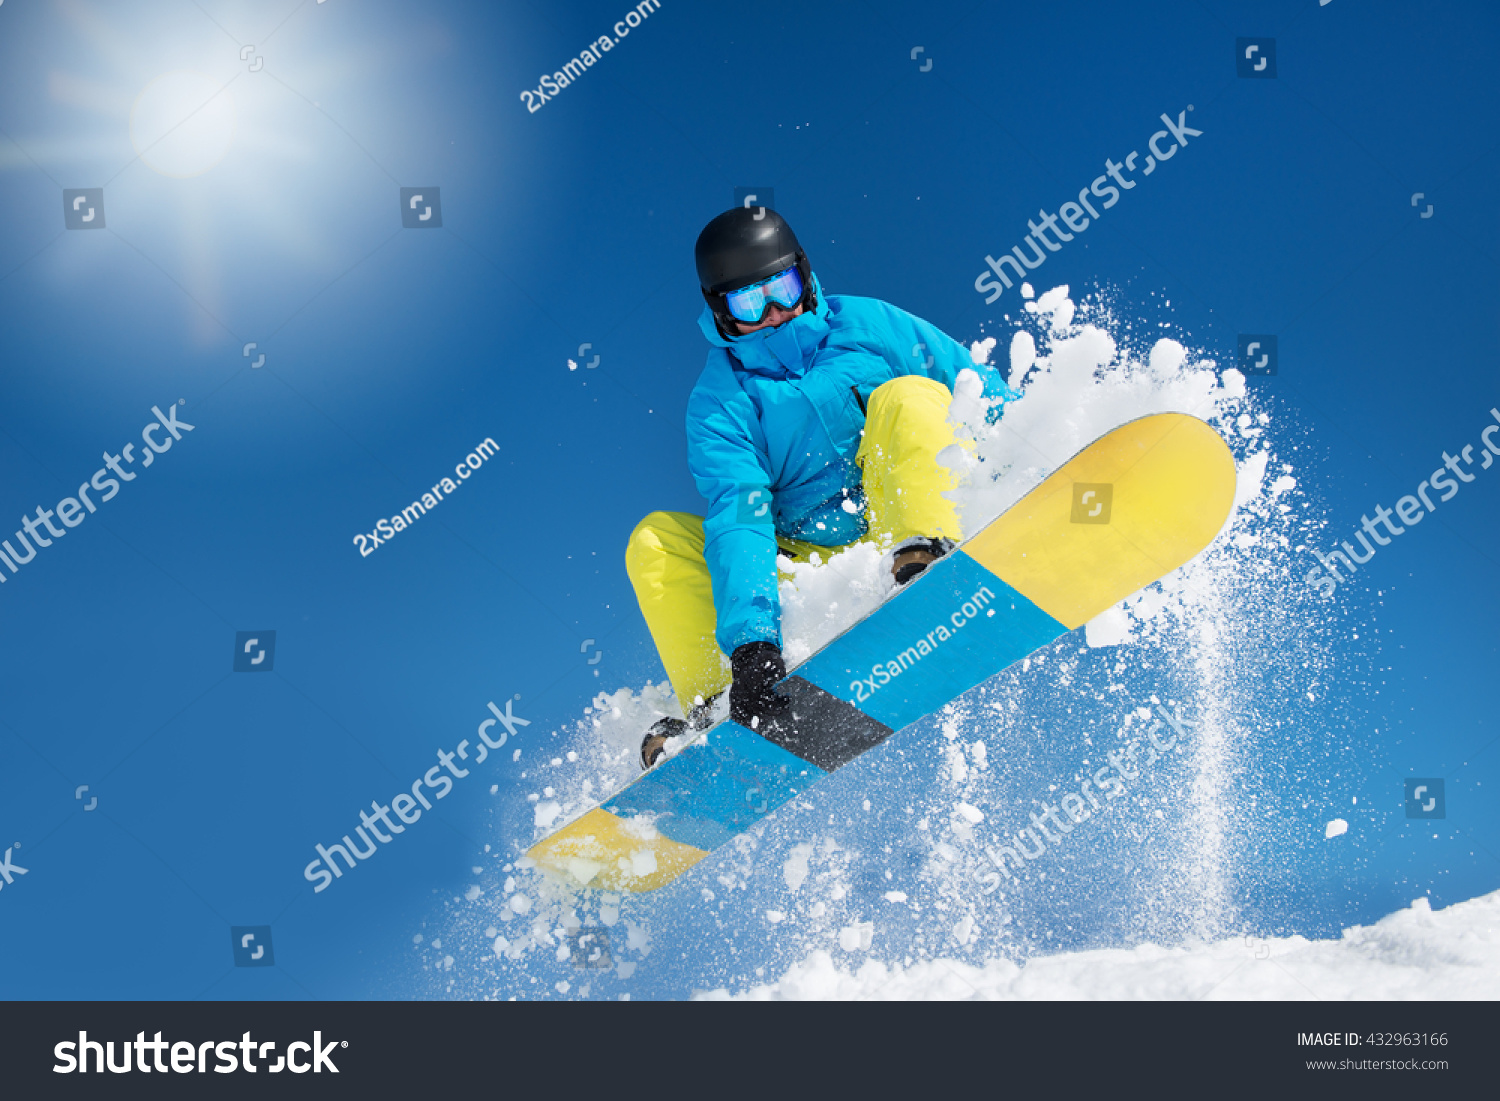 Active snowboarder in the air hitting a jump #432963166